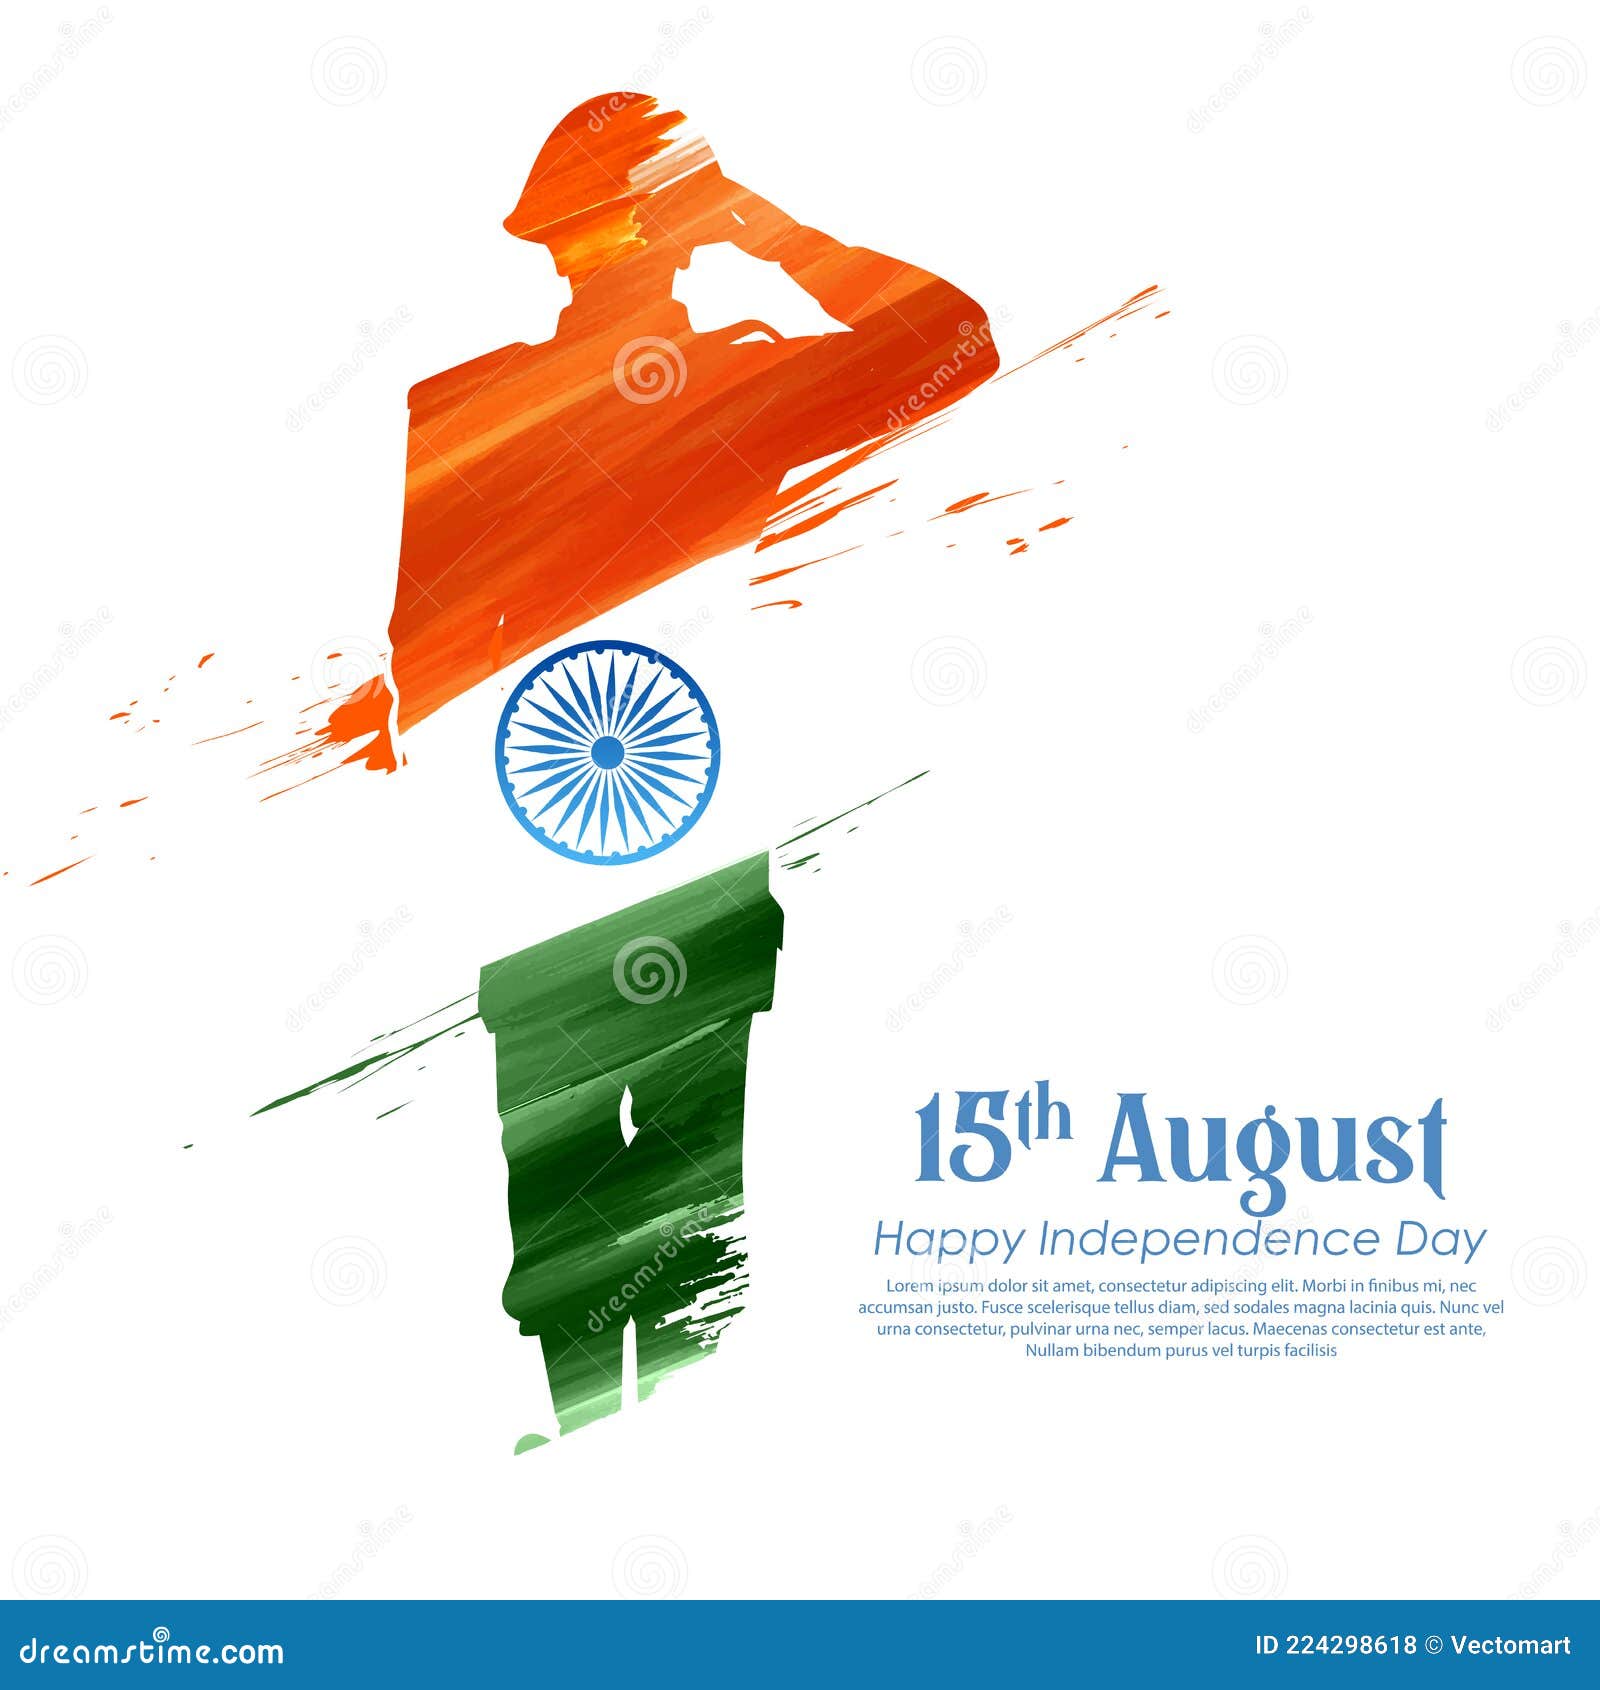 Indian Army Soldier Nation Hero on Pride of India on 15th August Happy  Independence Day Background Stock Vector - Illustration of flag, military:  224298618